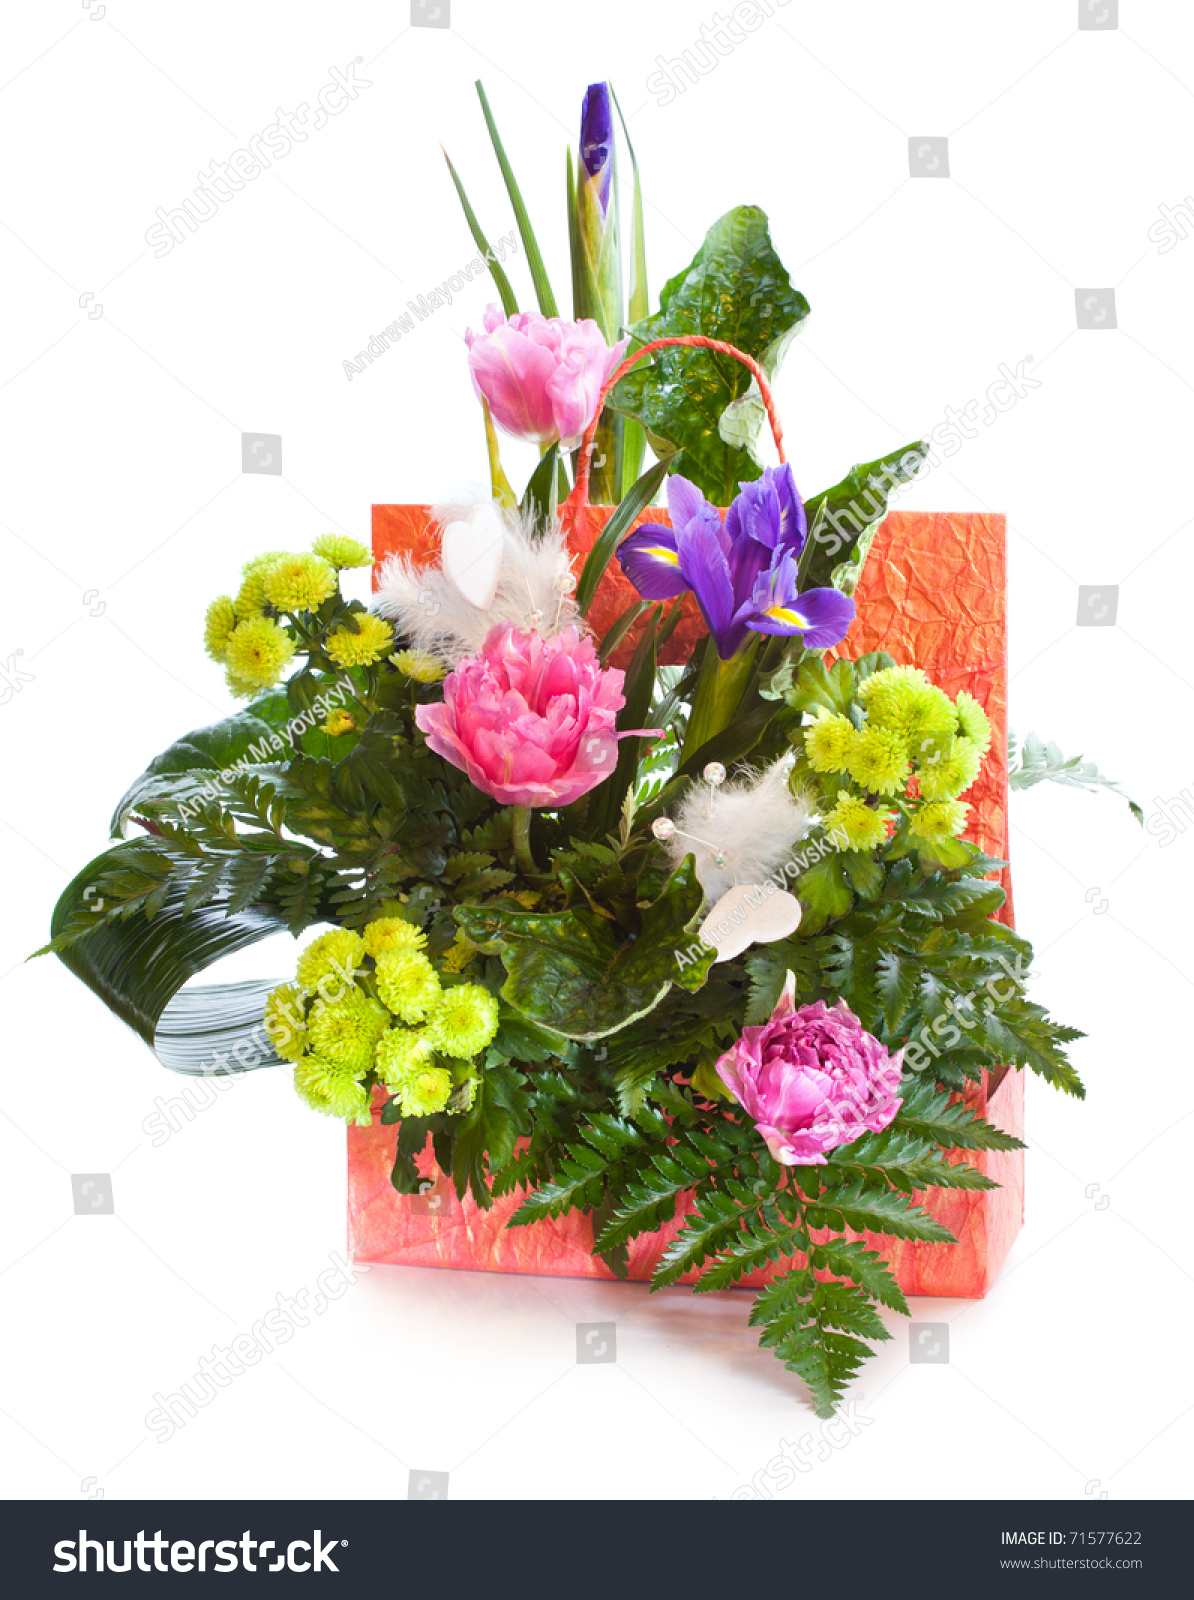 Bright Flower Bouquet Isolated Over White Background Stock Photo 71577622 : Shutterstock